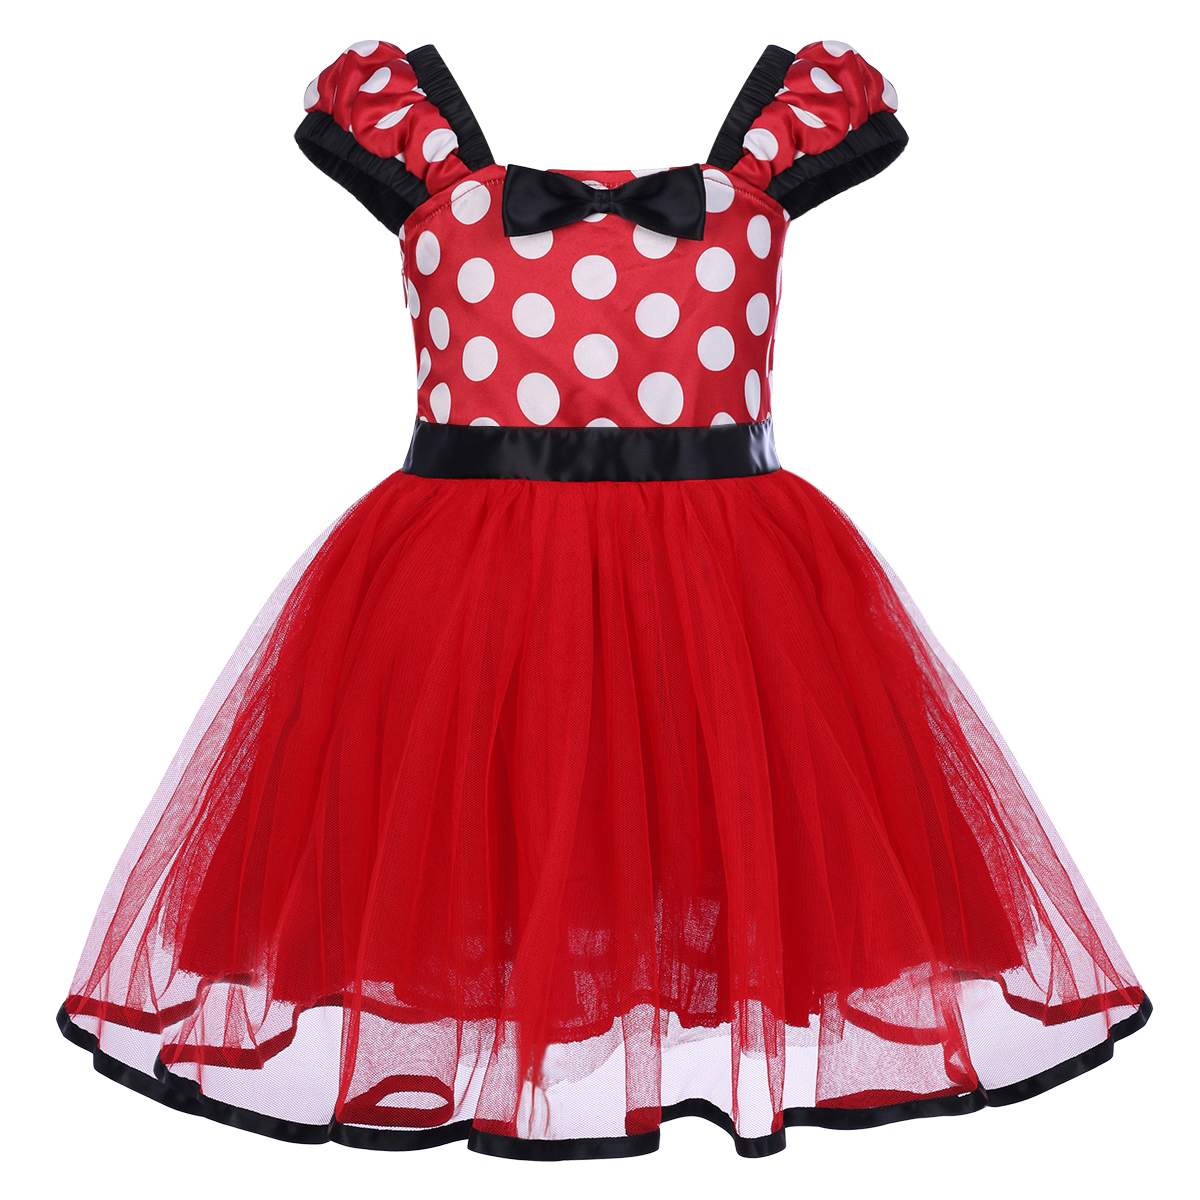 IBTOM CASTLE Toddler Girls Polka Dots Princess Party Cosplay Pageant Fancy Dress up Birthday Tutu Dress + Ears Headband Outfit Set 3-4 Years Red - image 3 of 8